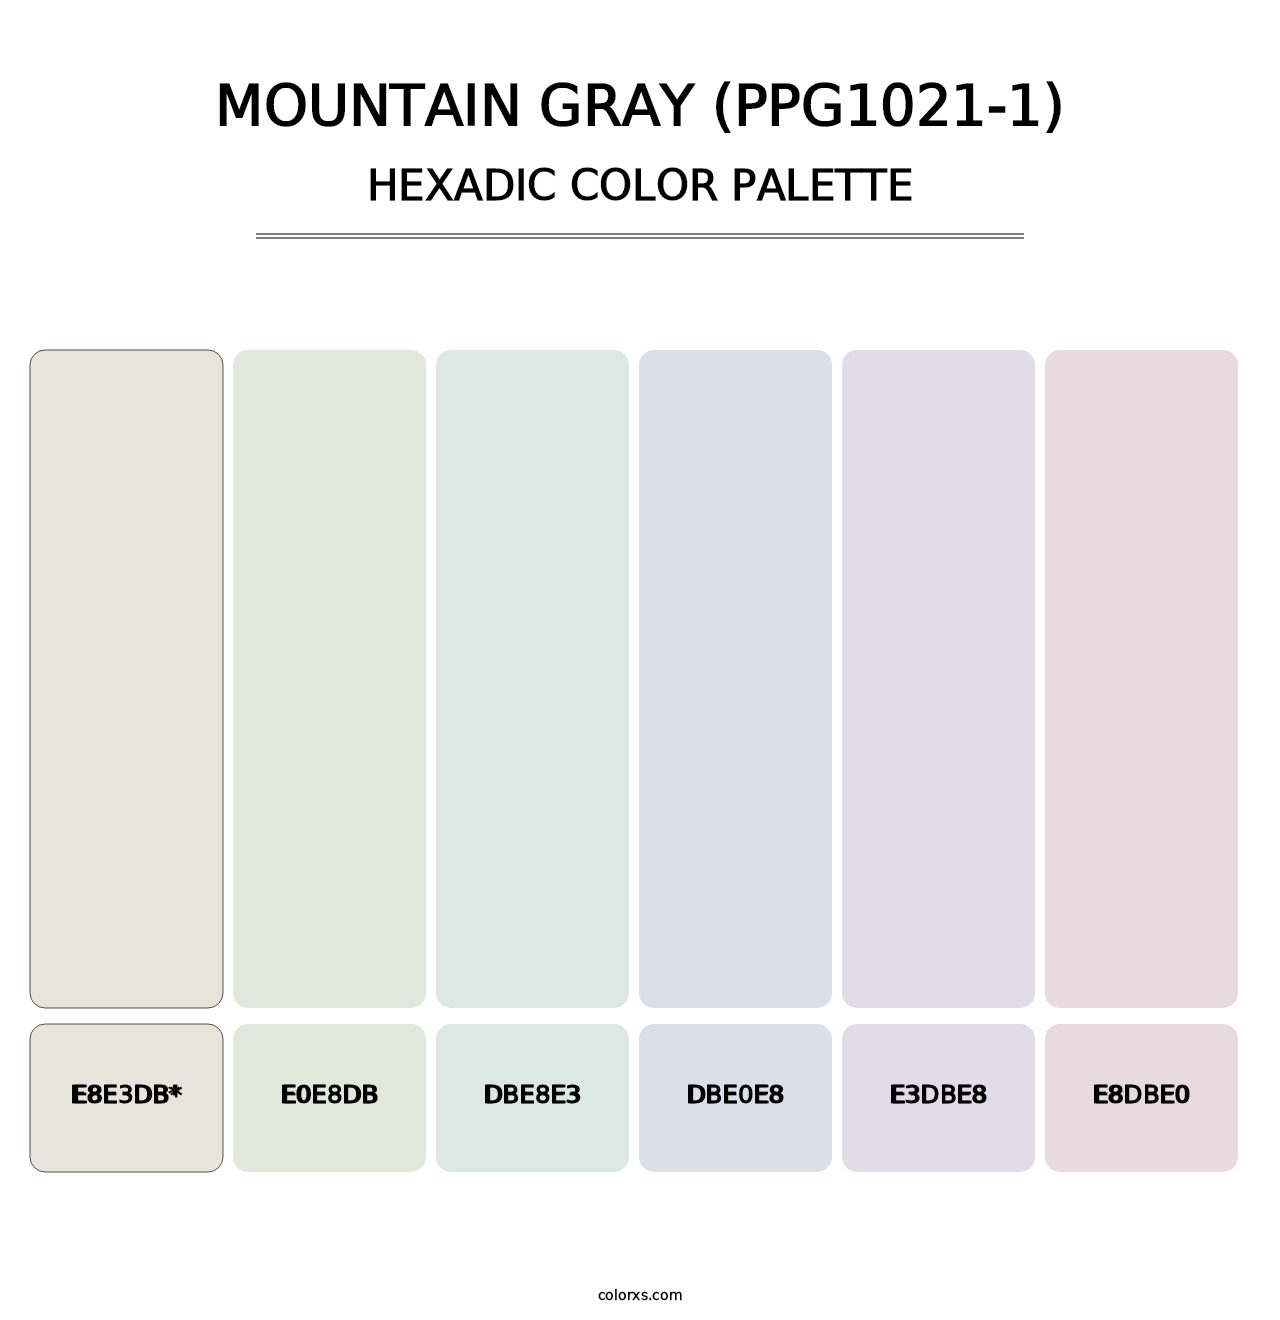 Mountain Gray (PPG1021-1) - Hexadic Color Palette